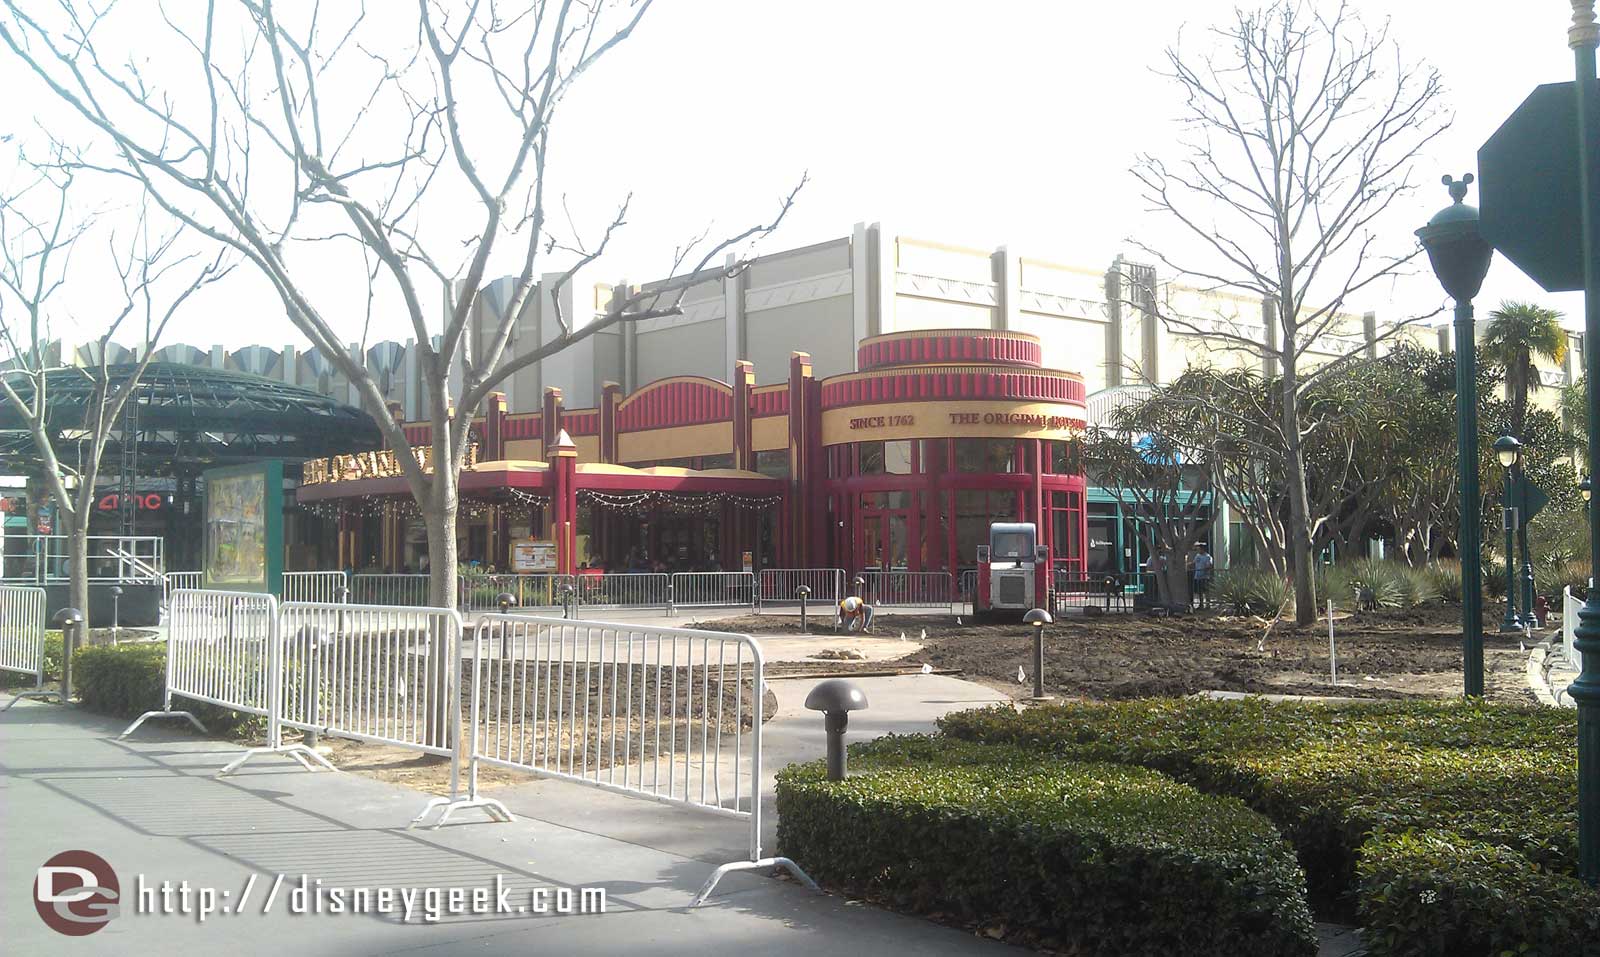 Just arrived at the Disneyland Resort. Still working on replacing the lawn where the ice rink was.